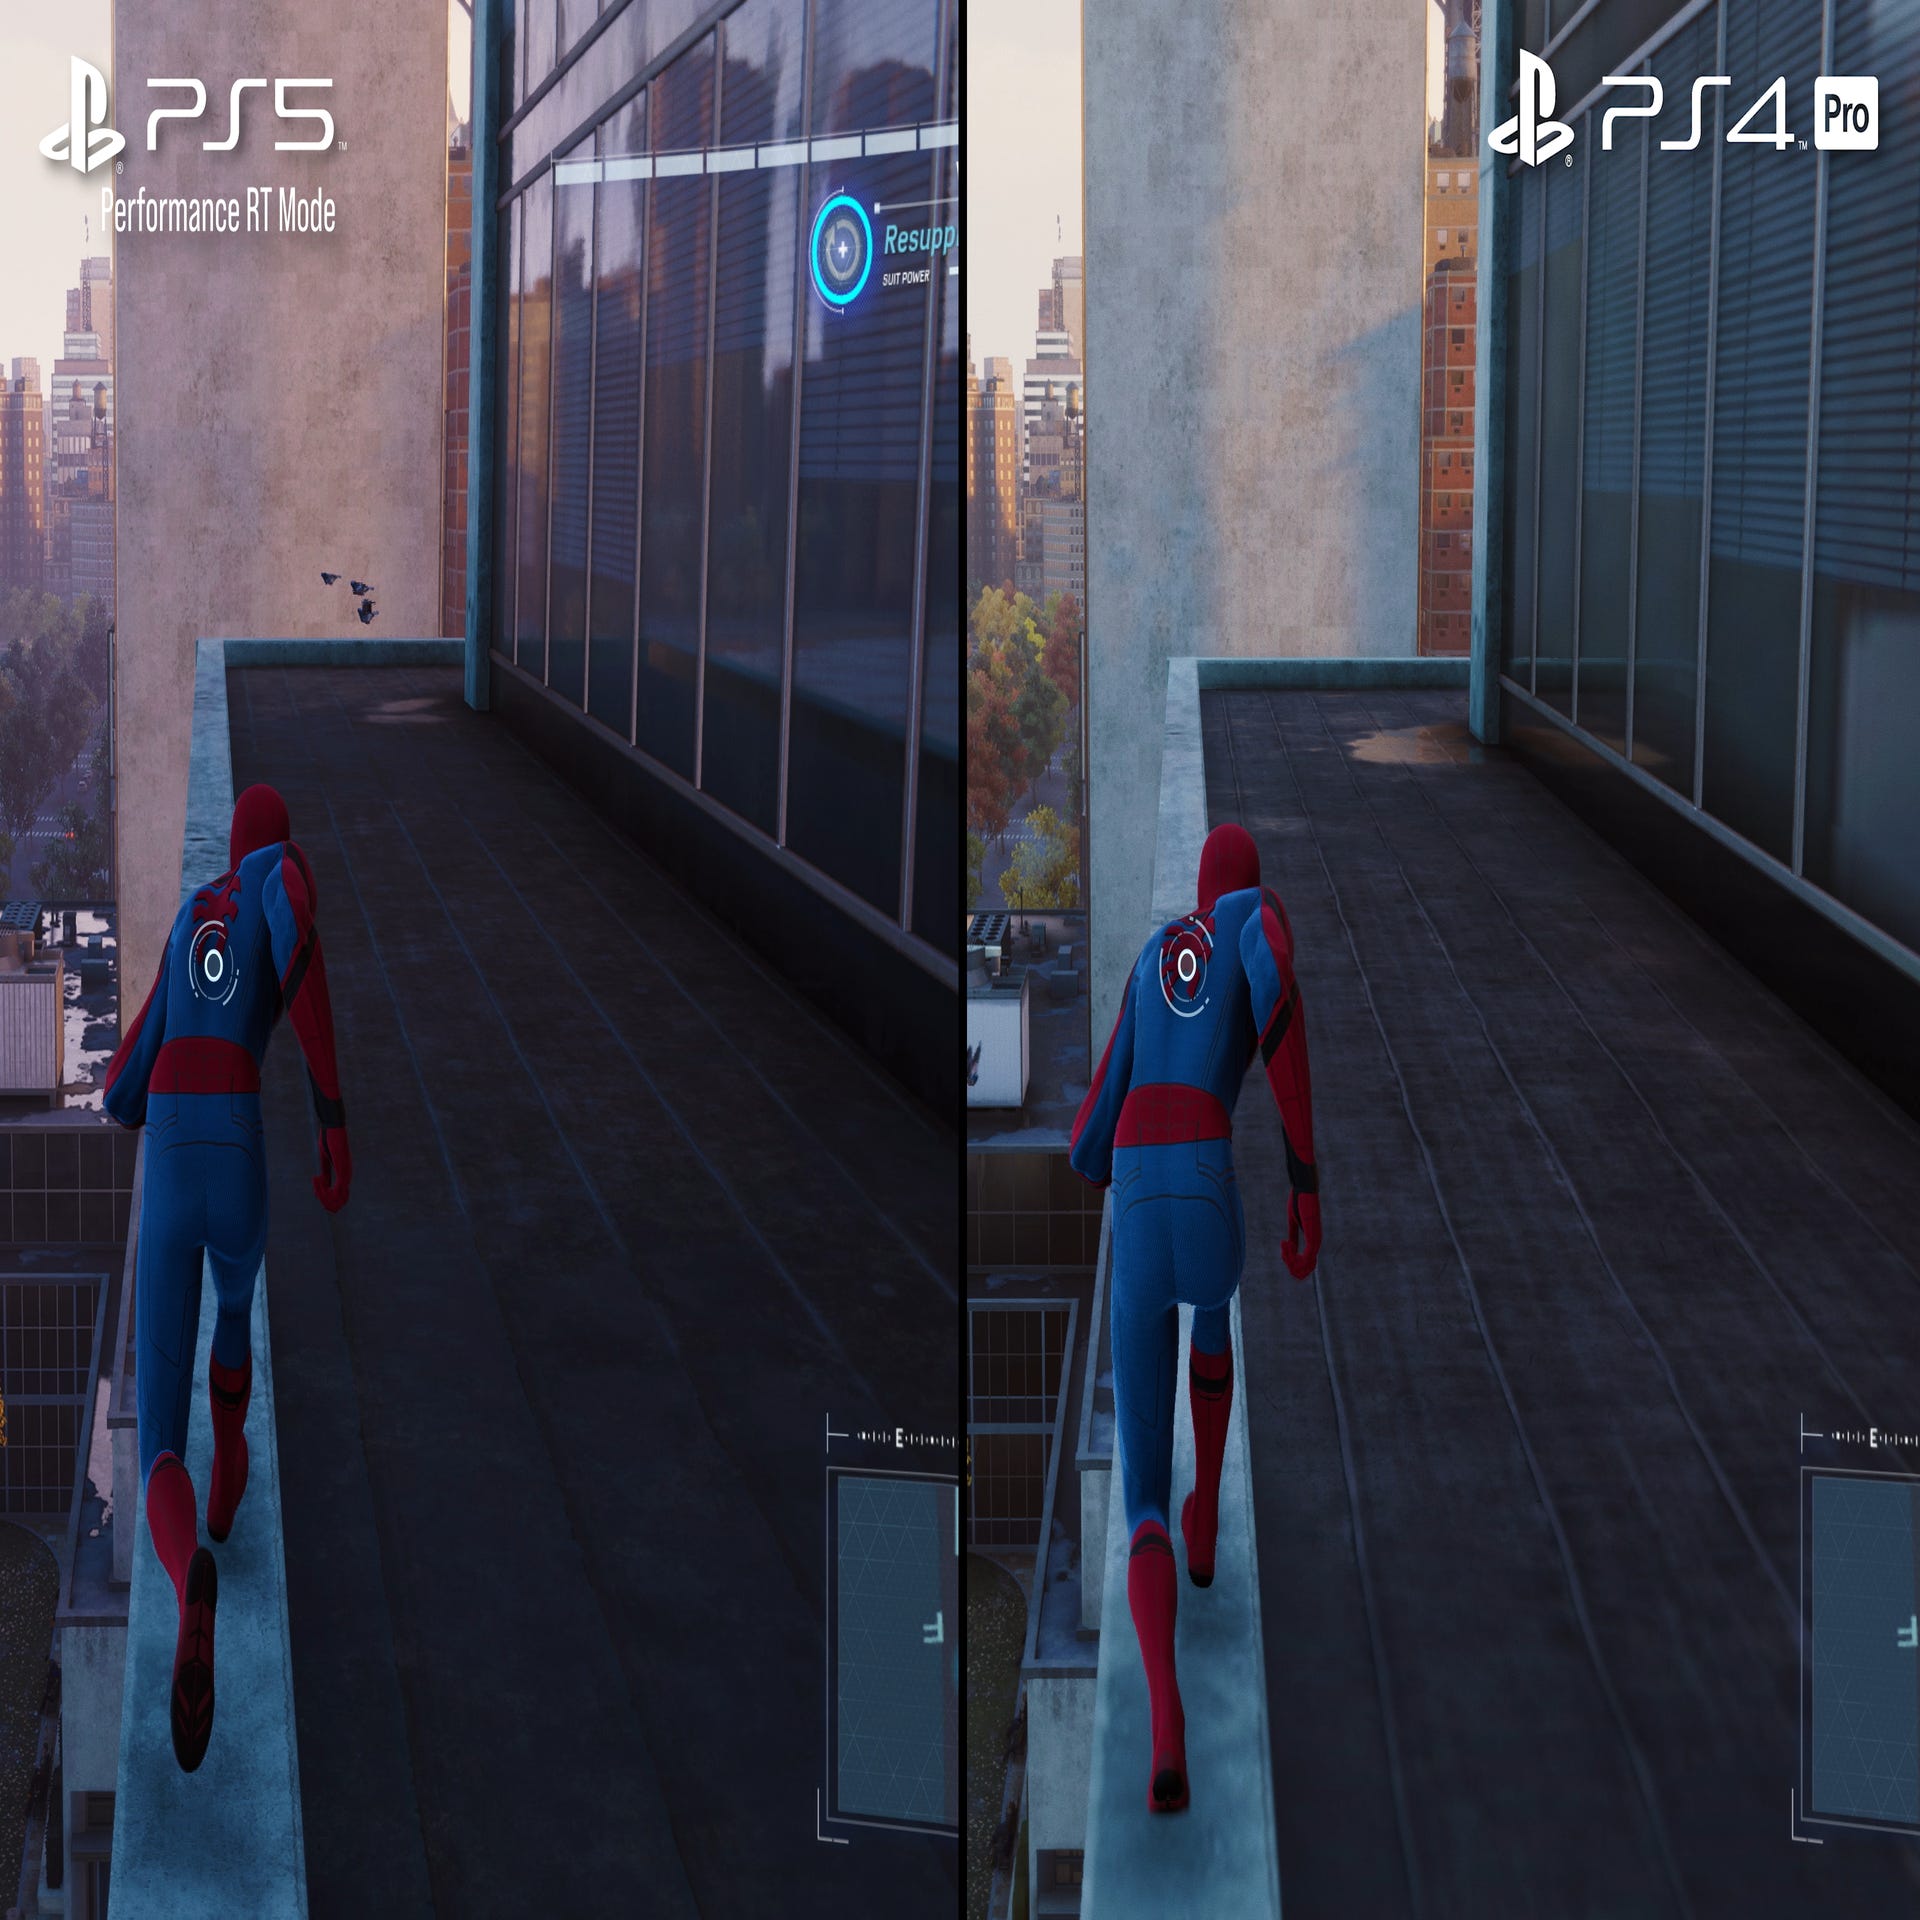 Marvel's Spider-Man Remastered: substantial enhancements vs PS4 Pro - plus  ray tracing at 60fps